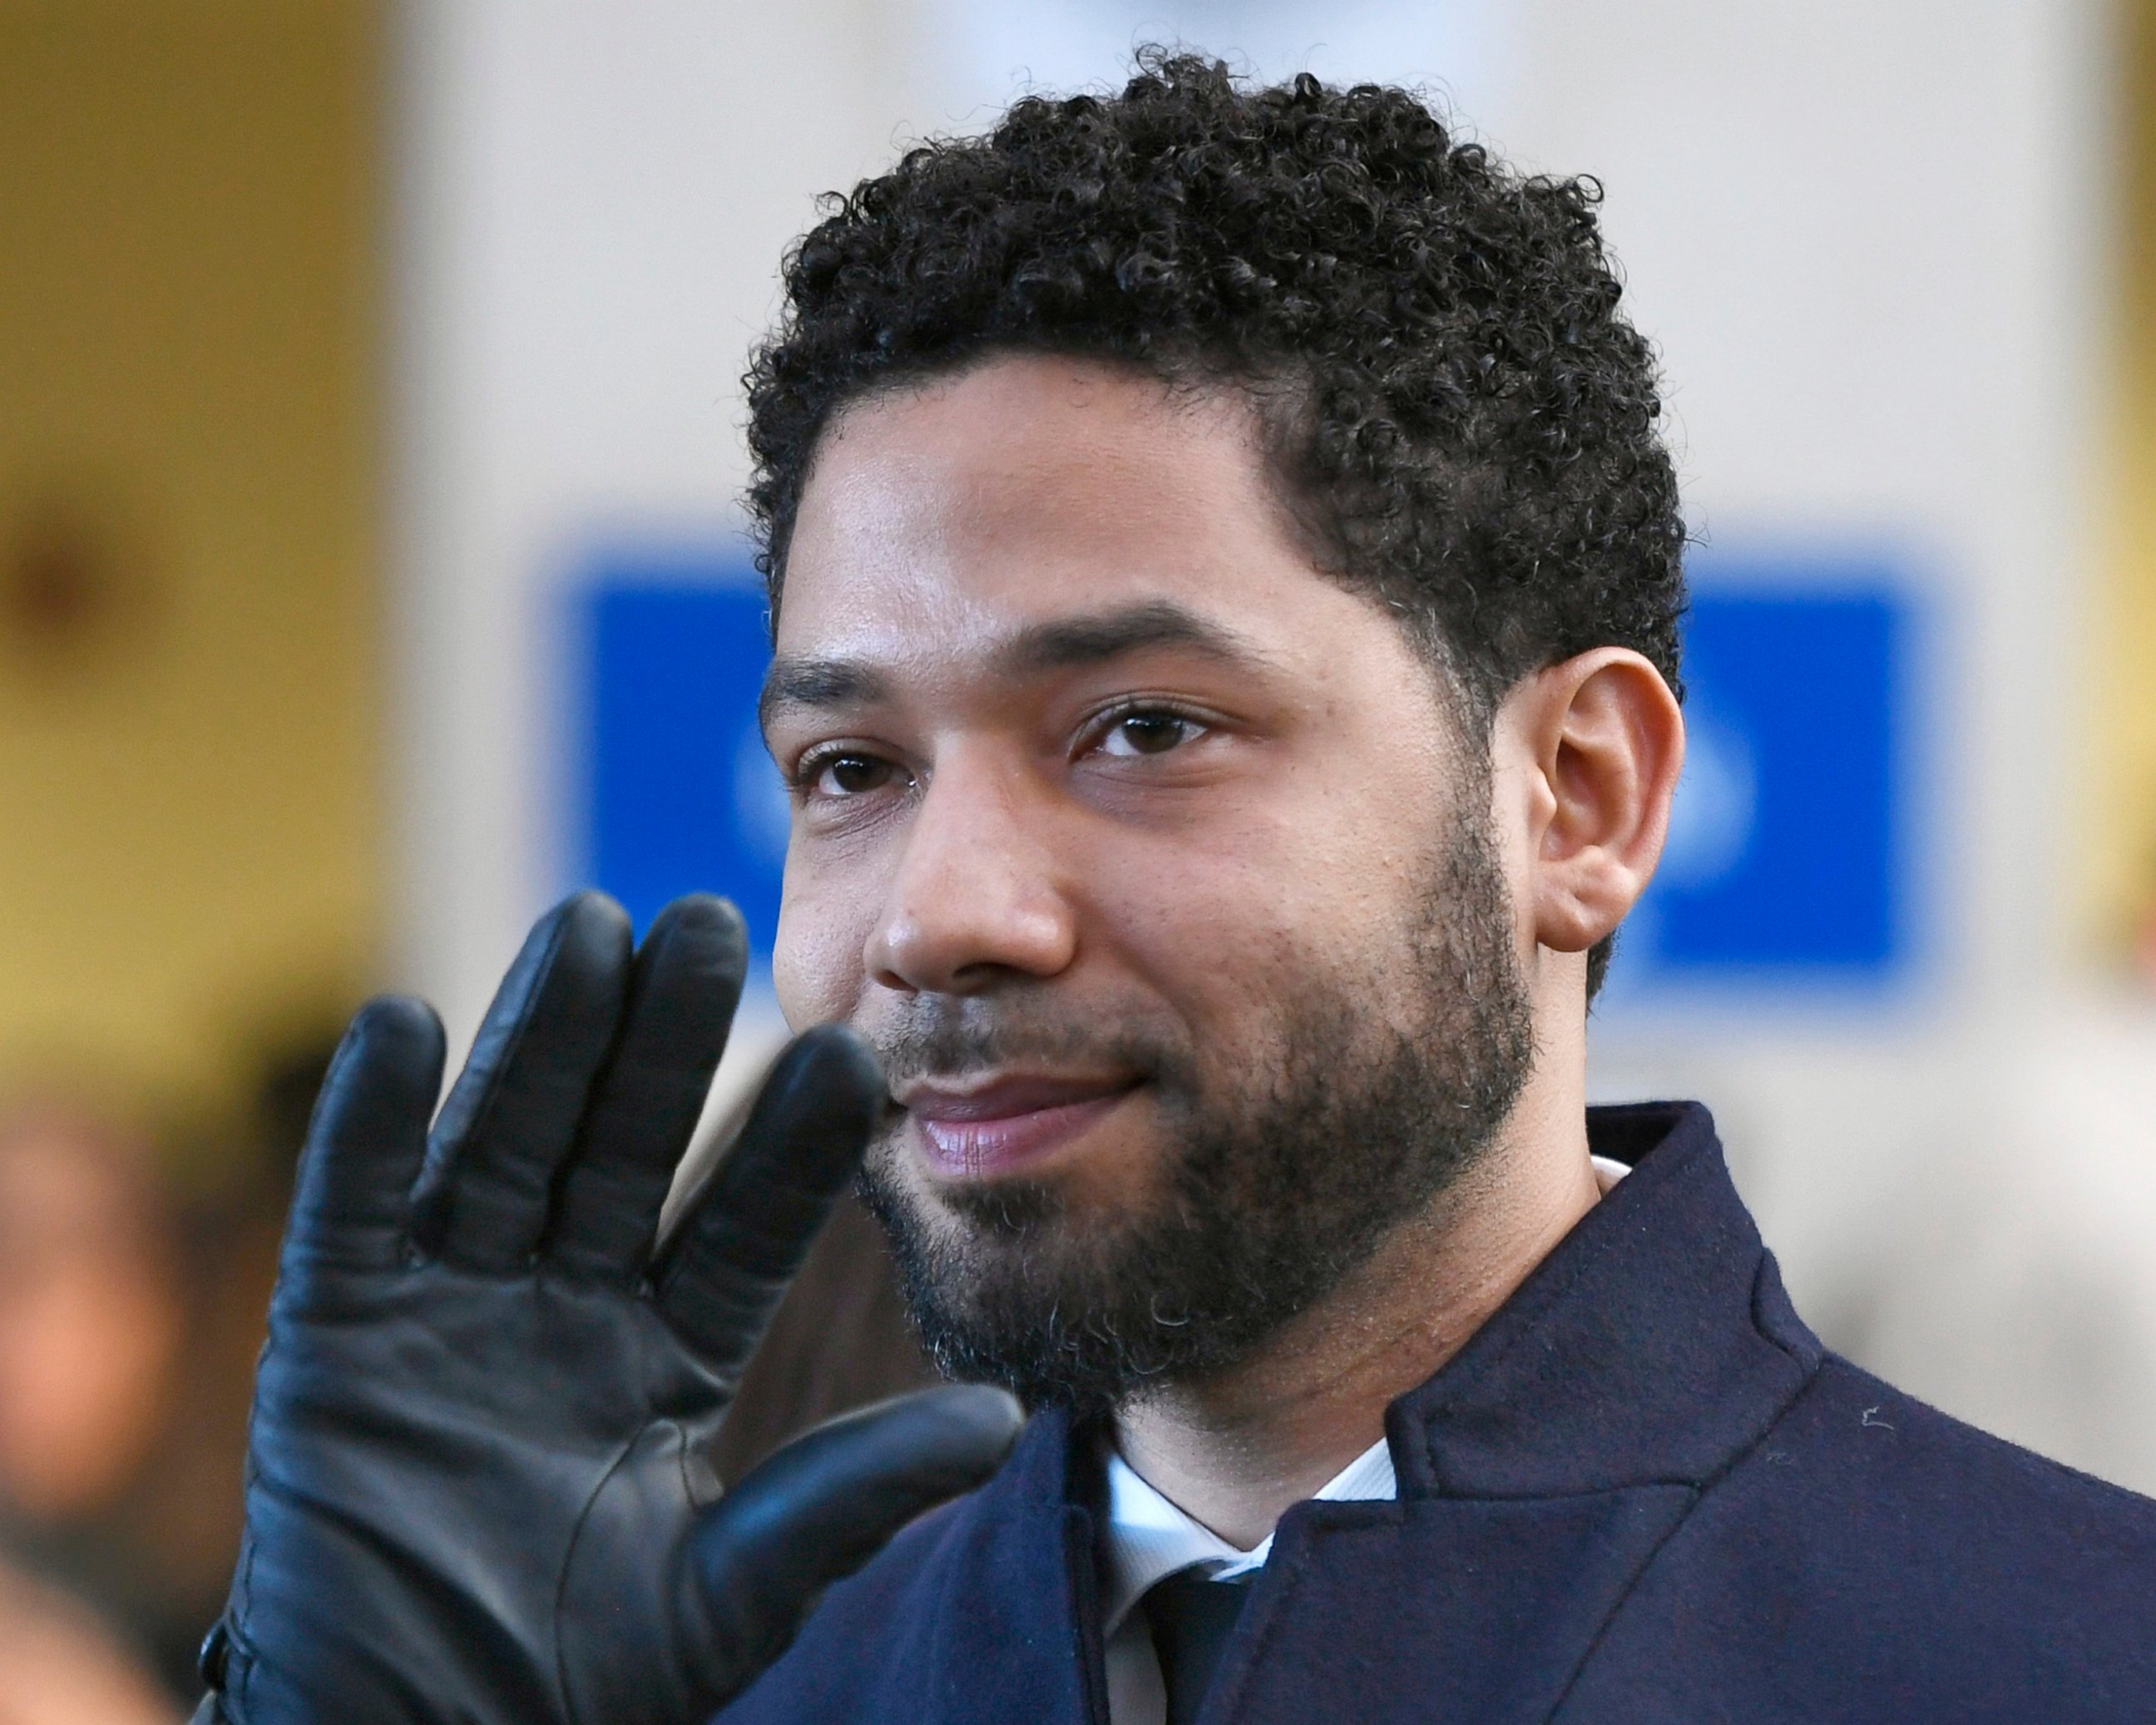 PHOTO: In this March 26, 2019, file photo, Actor Jussie Smollett smiles and waves to supporters before leaving Cook County Court after his charges were dropped in Chicago.